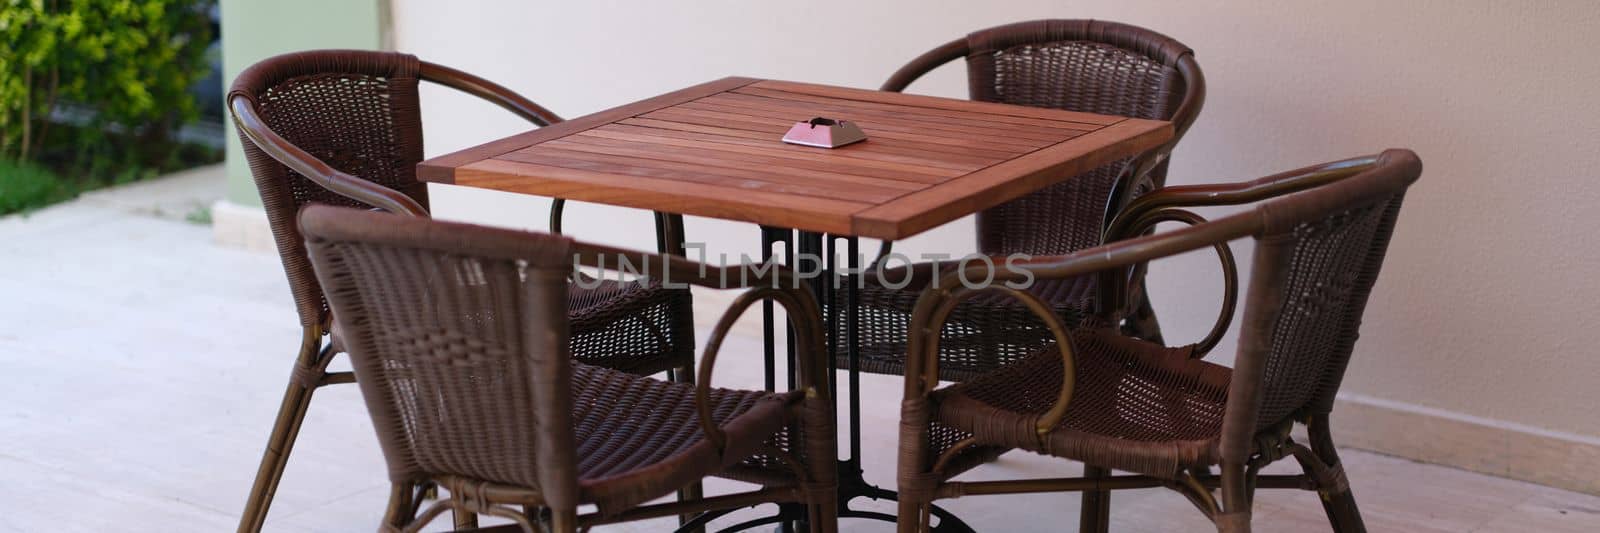 Summer wooden table and wicker chairs on veranda. Summer outdoor furniture concept